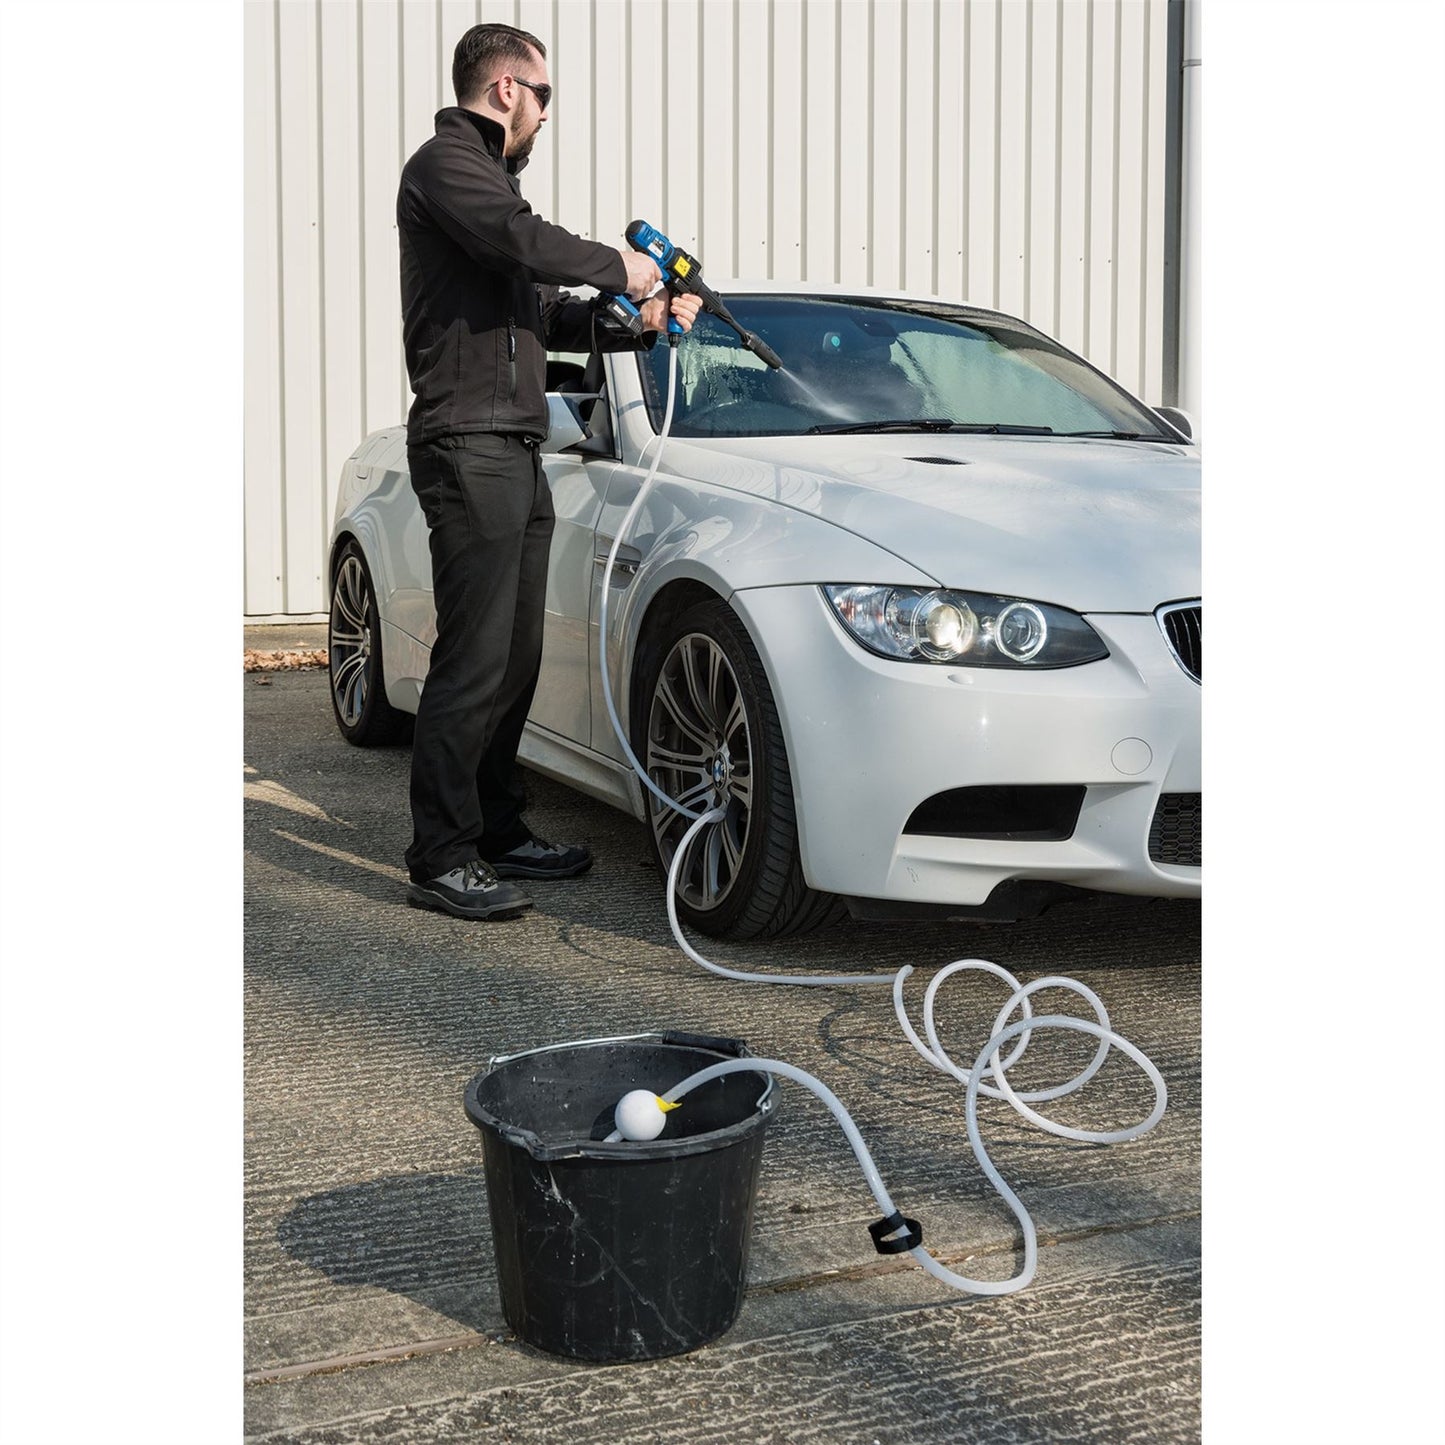 Draper 97533 RECHARGABLE 20V Pressure Washer Kit Use with Bucket no hose needed